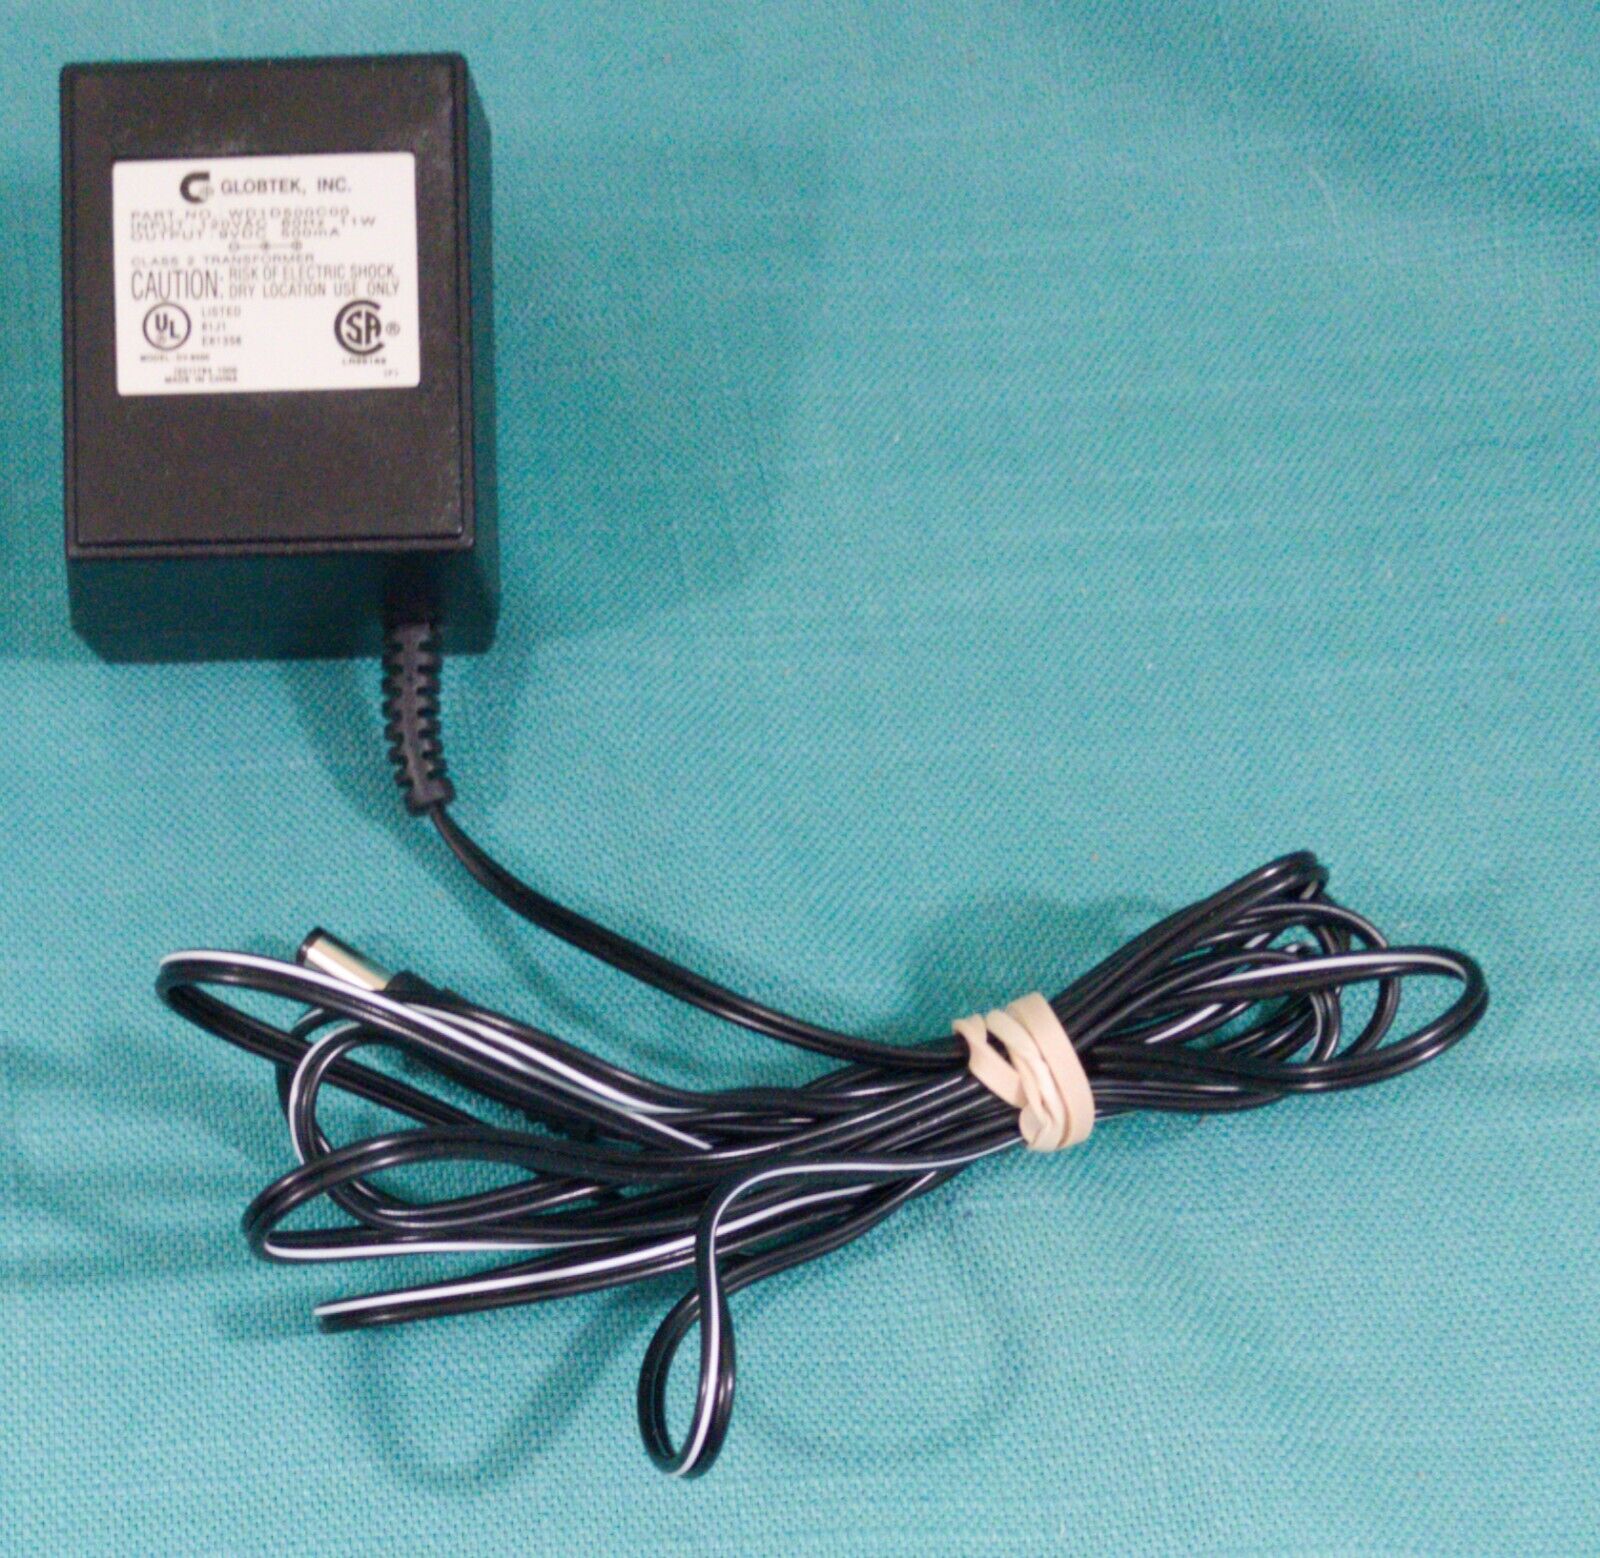 *Brand NEW* GlobTek WD1D500C00 9vdc 500mA AC to DC ADAPTER Tested Working POWER Supply